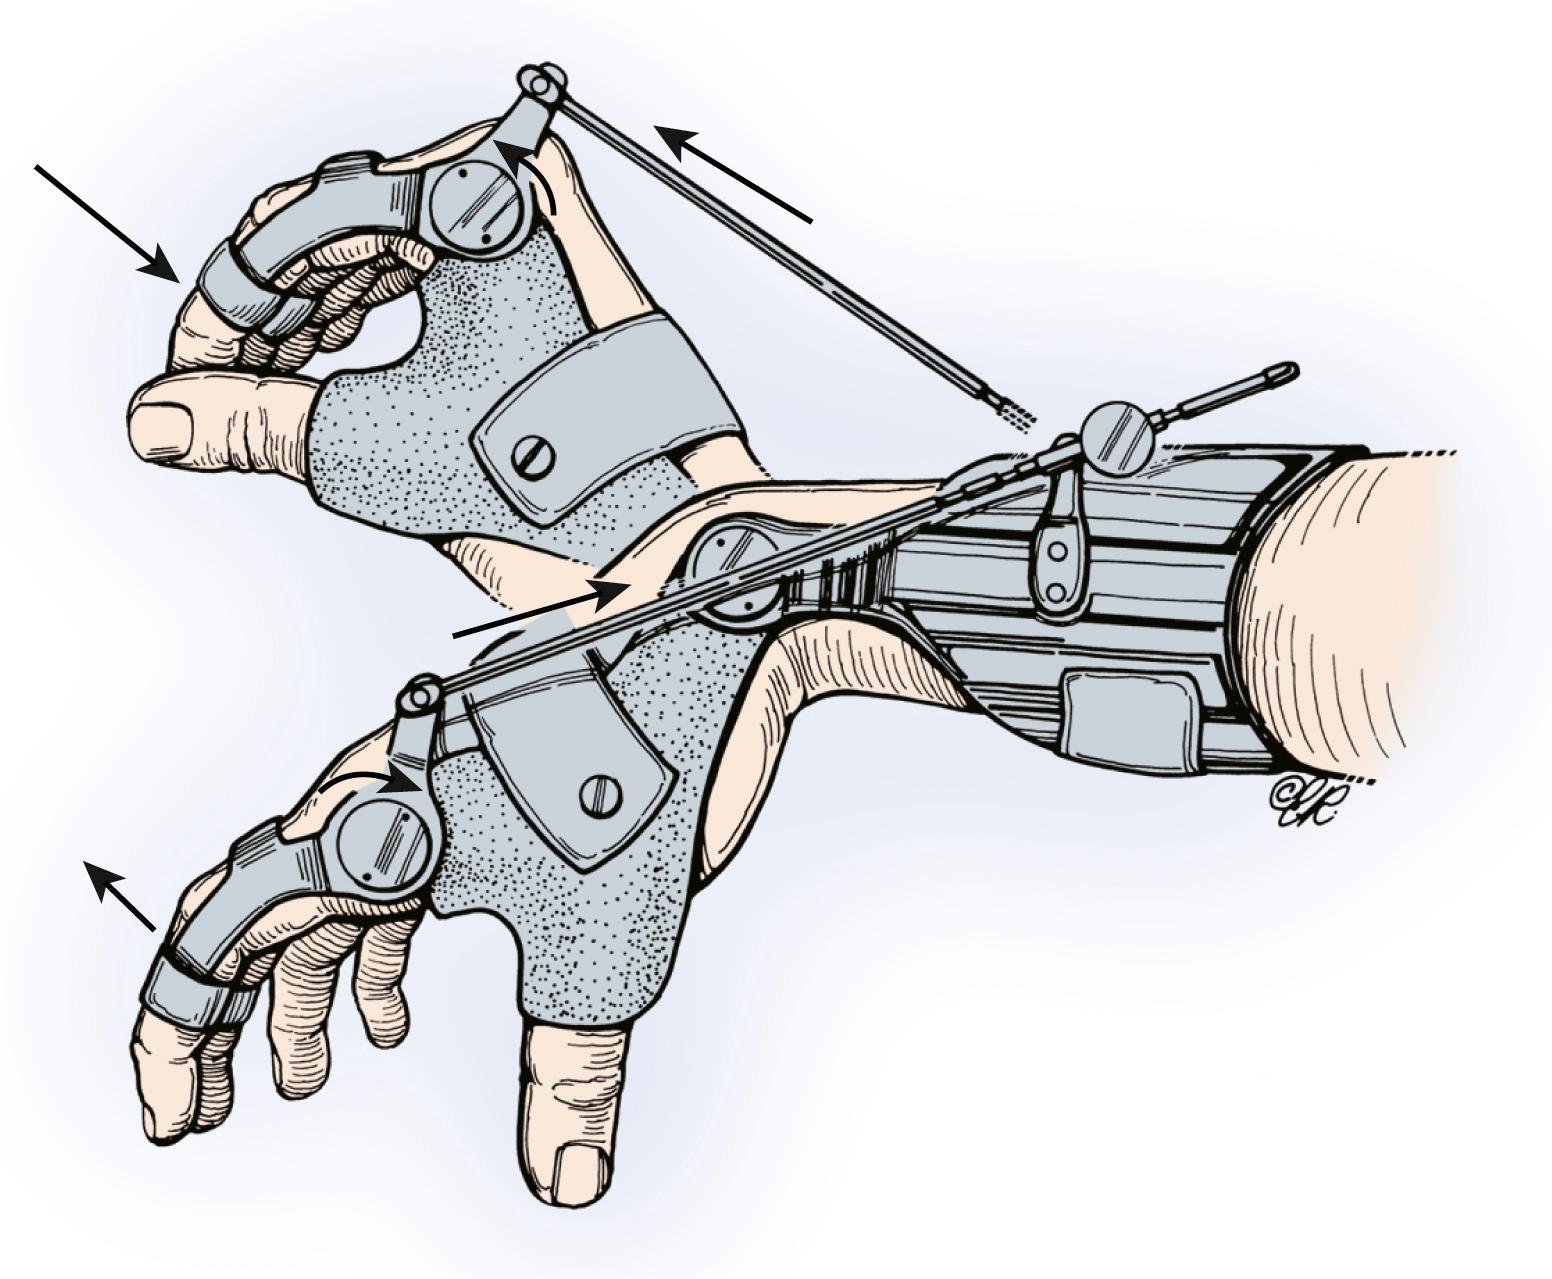 Fig. 33.17, The wrist-driven flexor hinge splint uses the principle of synergistic action. As the wrist is extended, the fingers are flexed to bring them into contact with the thumb, which is fixed. As the wrist is flexed, the fingers are extended.